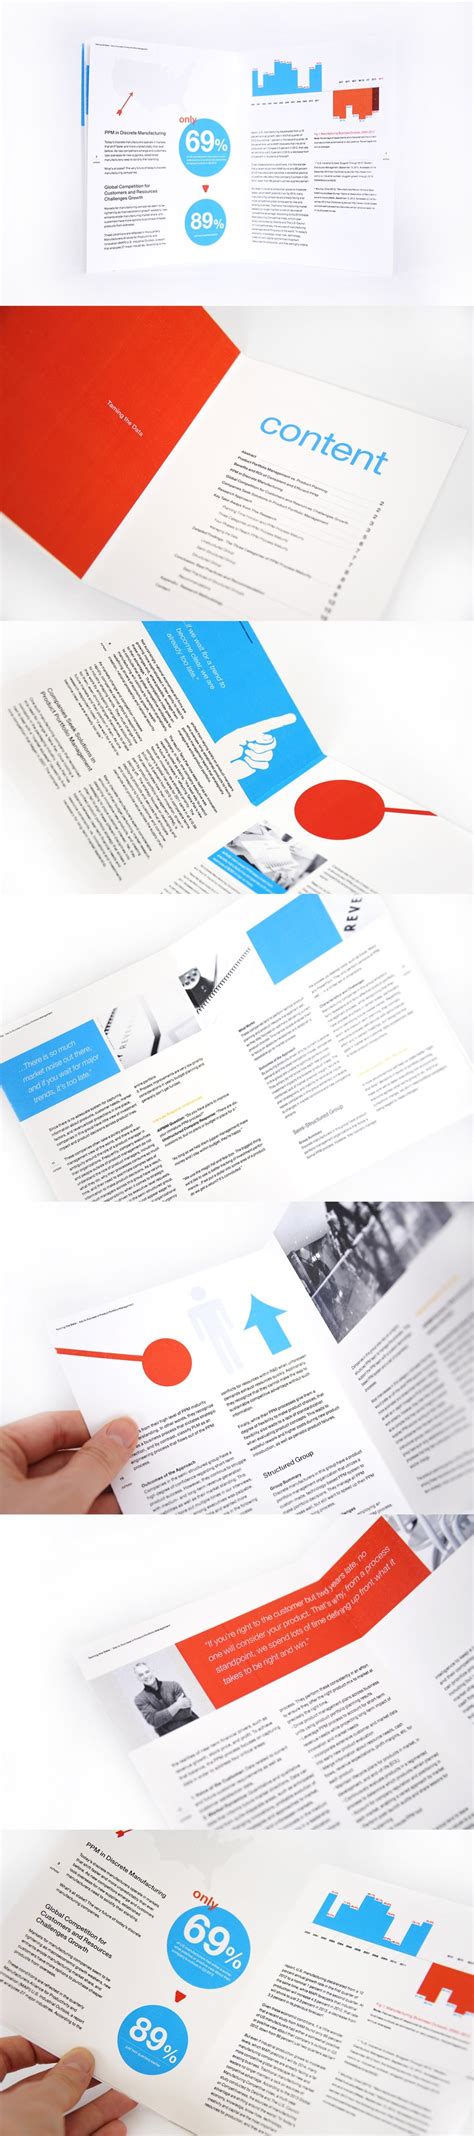 images  project template redesign  pinterest